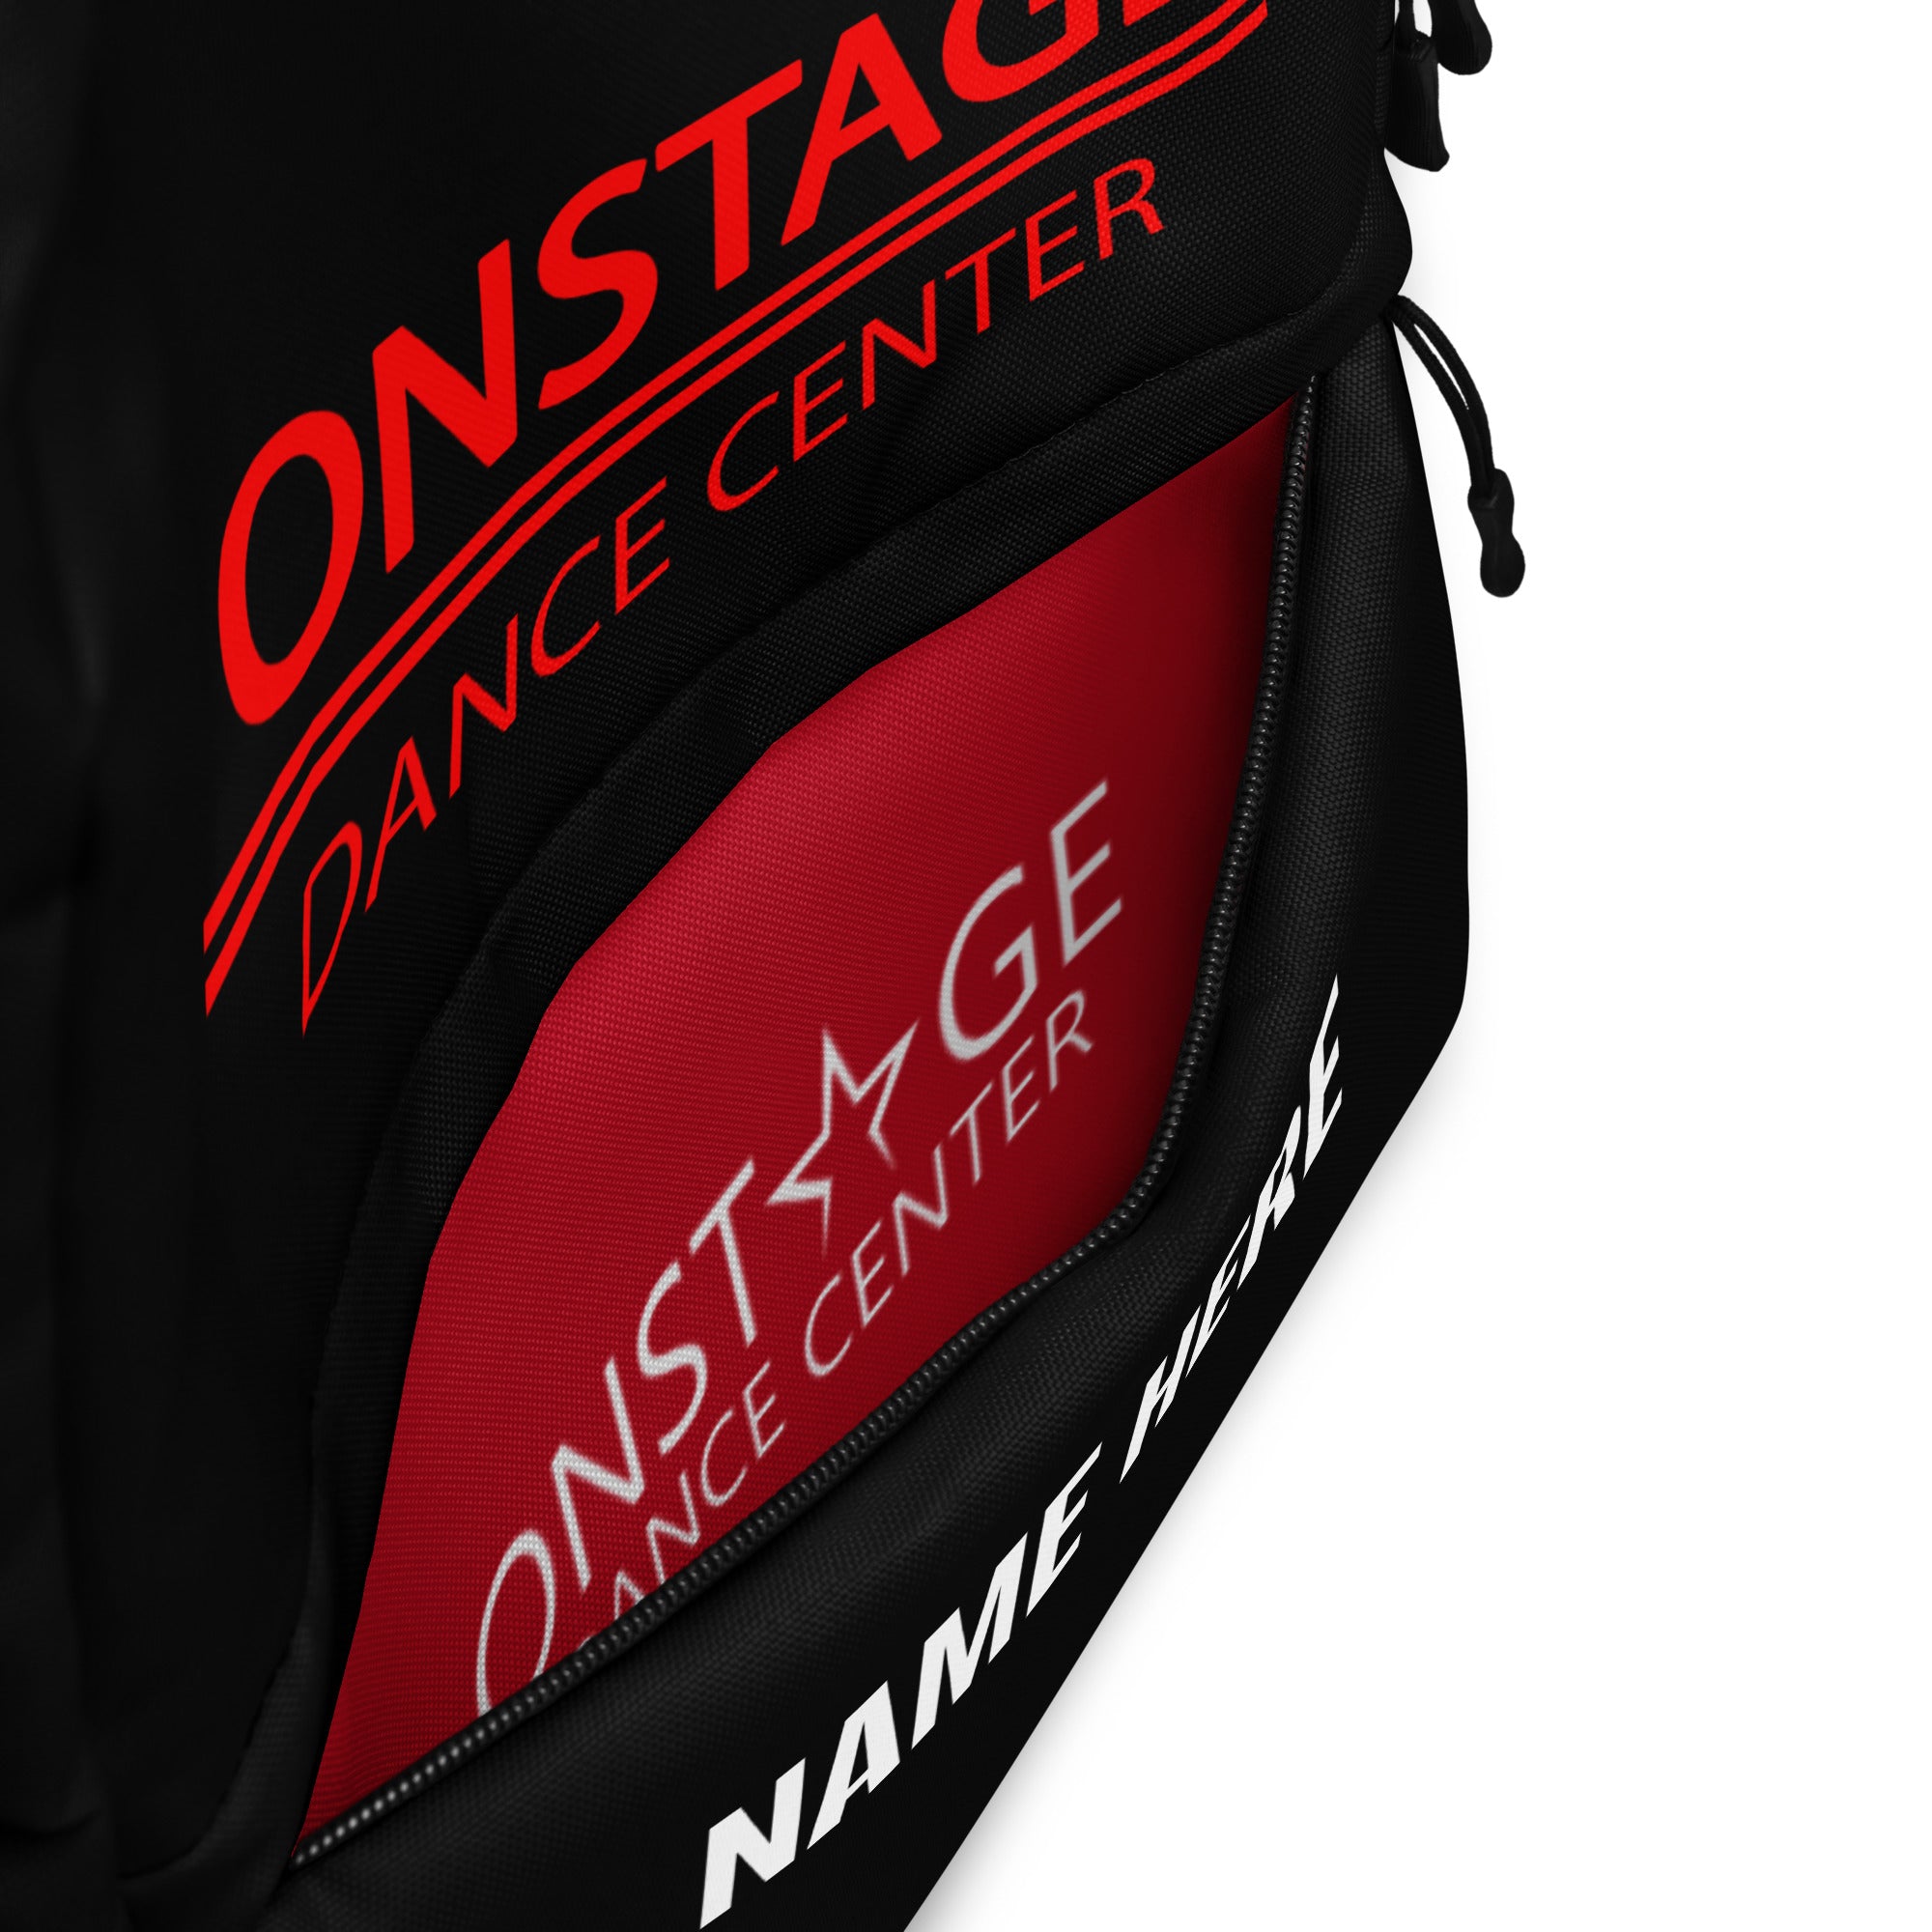 ONSTAGE Backpack (customizable by email)